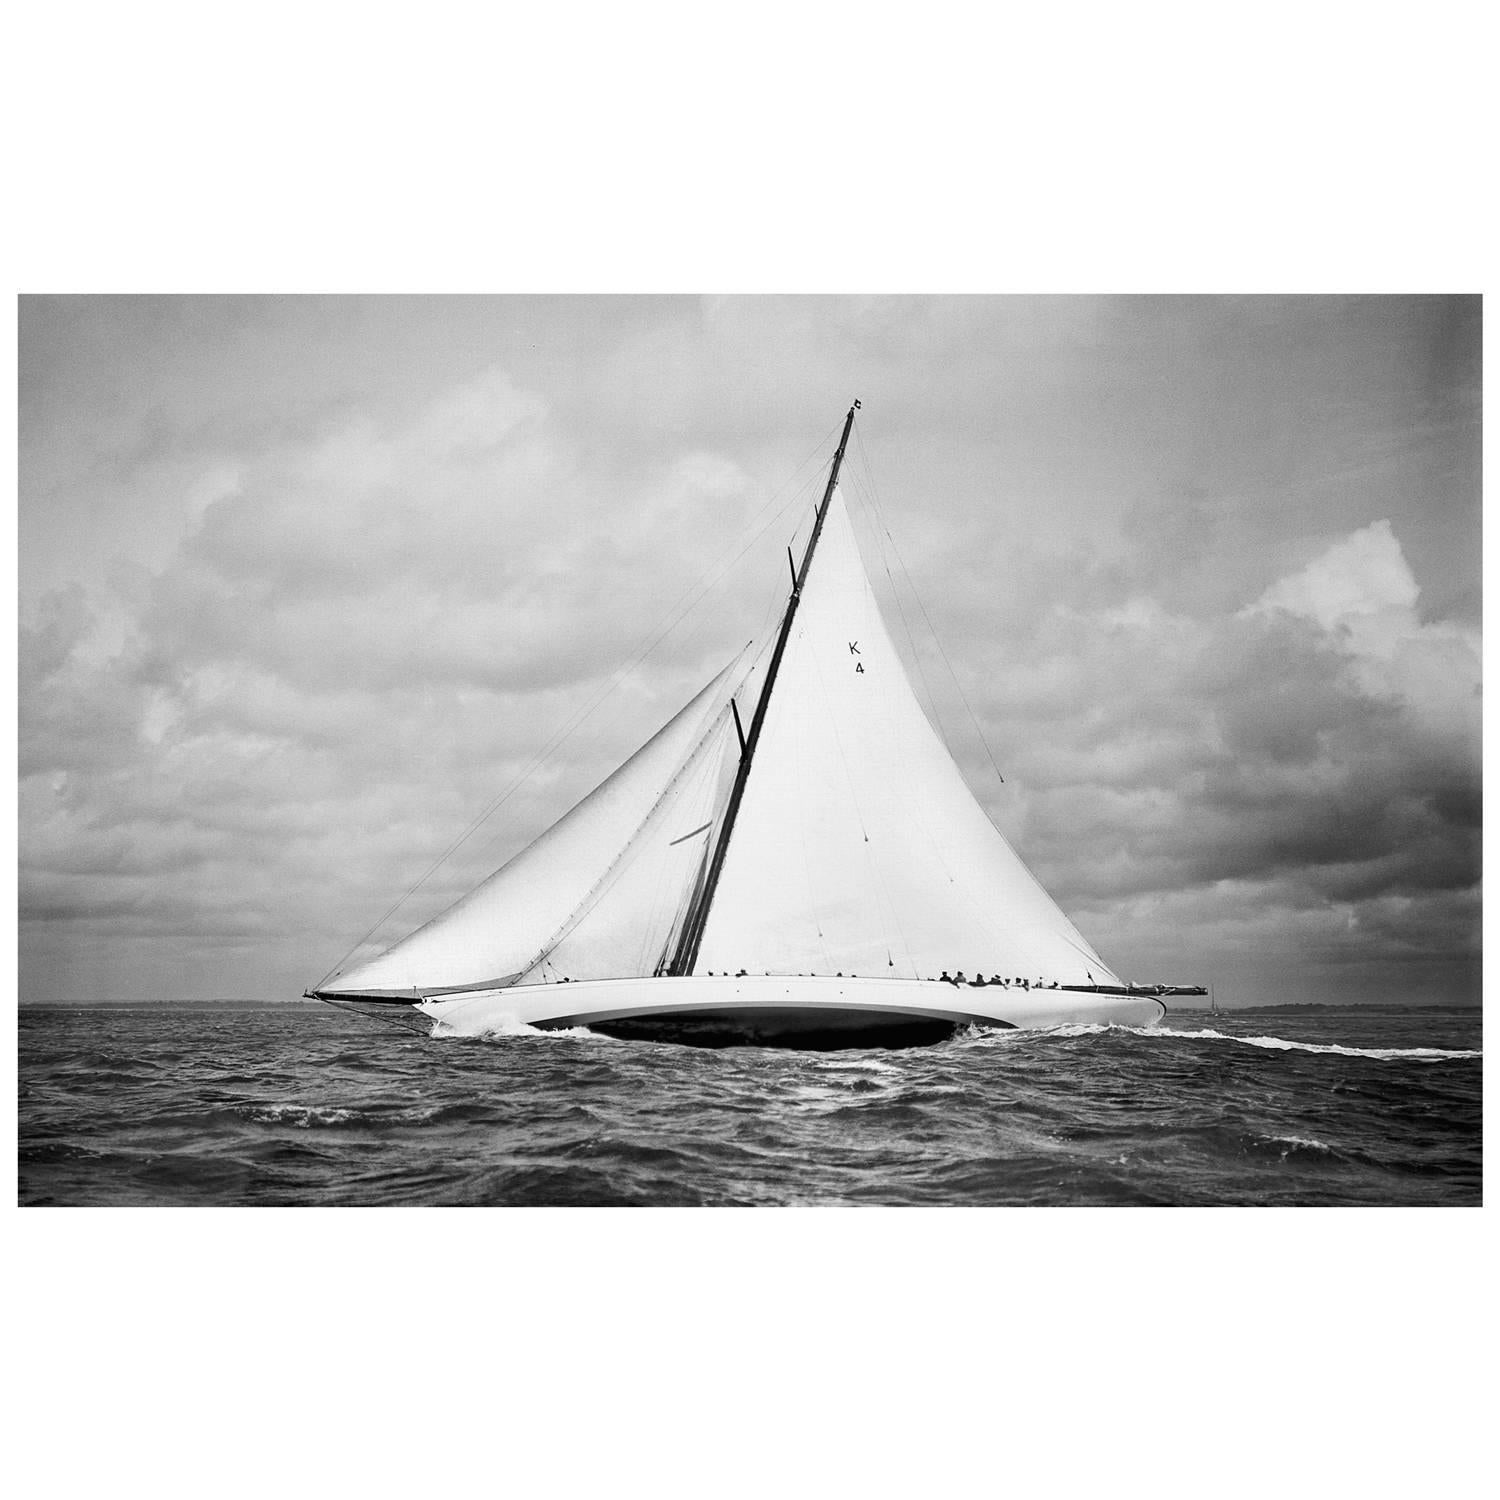 Frank Beken Black and White Photograph - Sailing Yacht Cambria, 1930